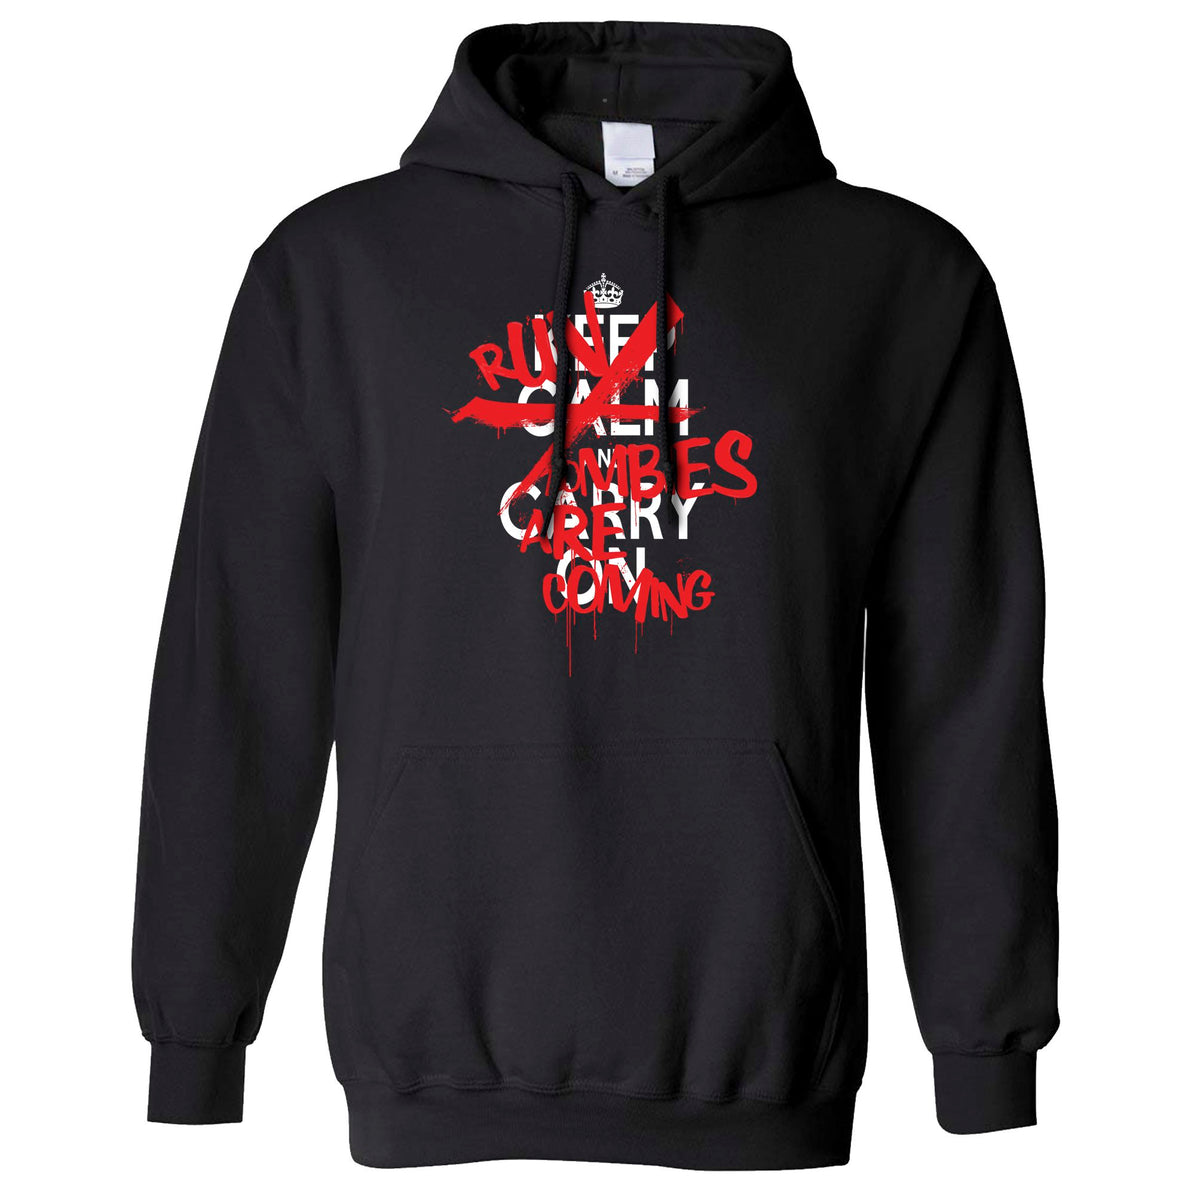 Keep Calm & Carry On | Run, Zombies Are Coming Hoodie Hooded – Shirtbox